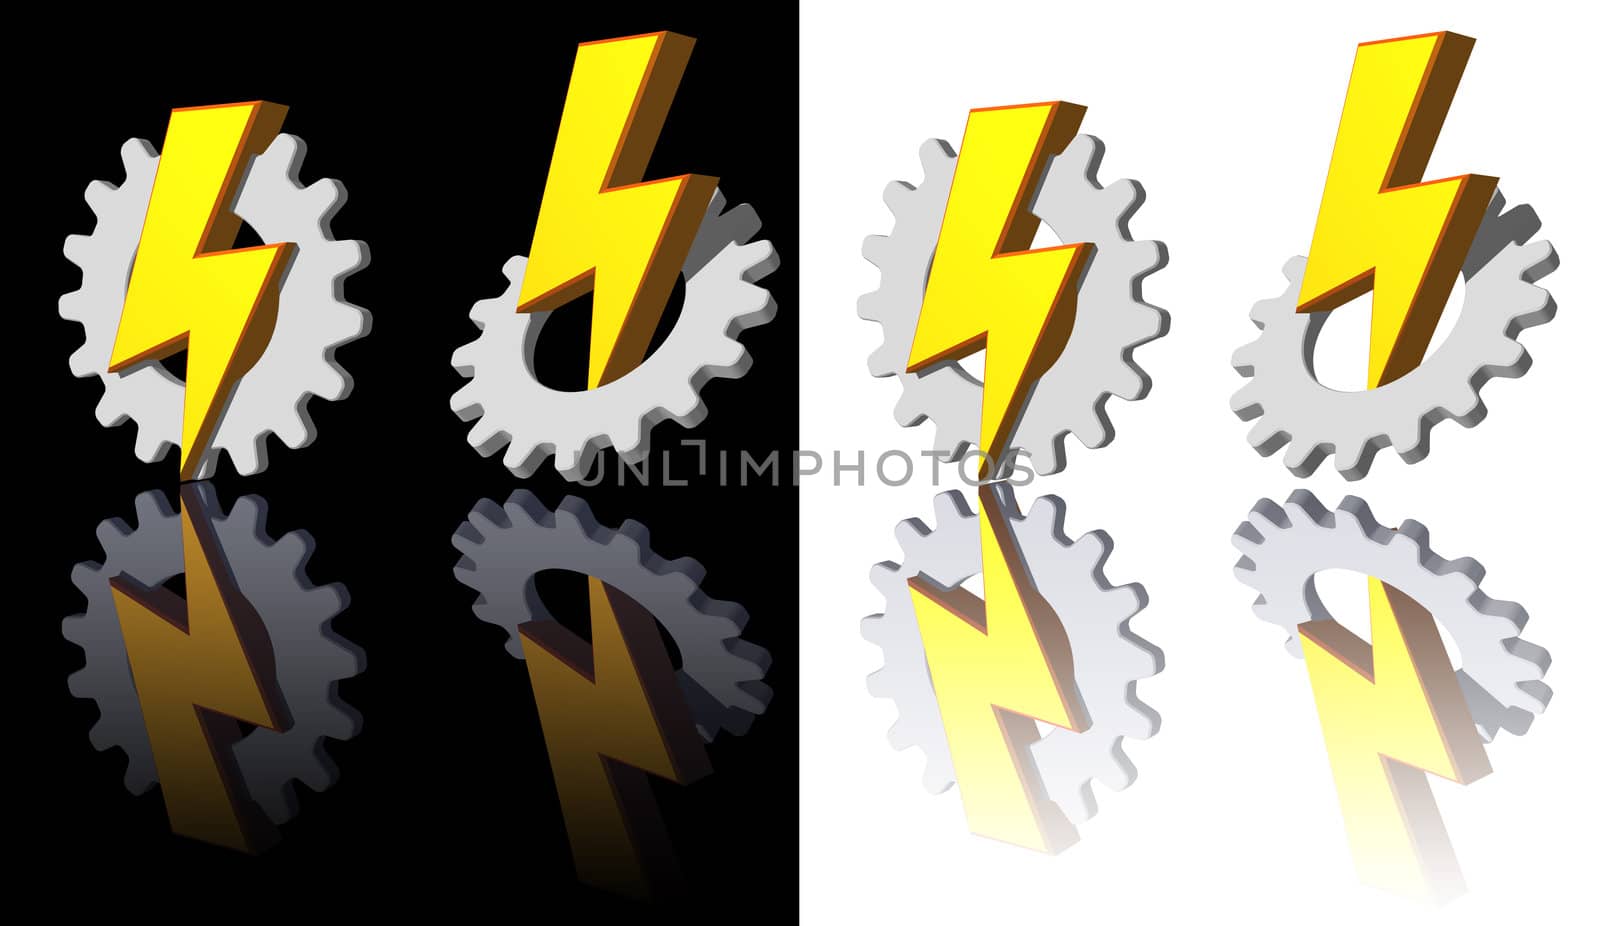 gear-flash logo on white and black backgrouns - 3d illustration